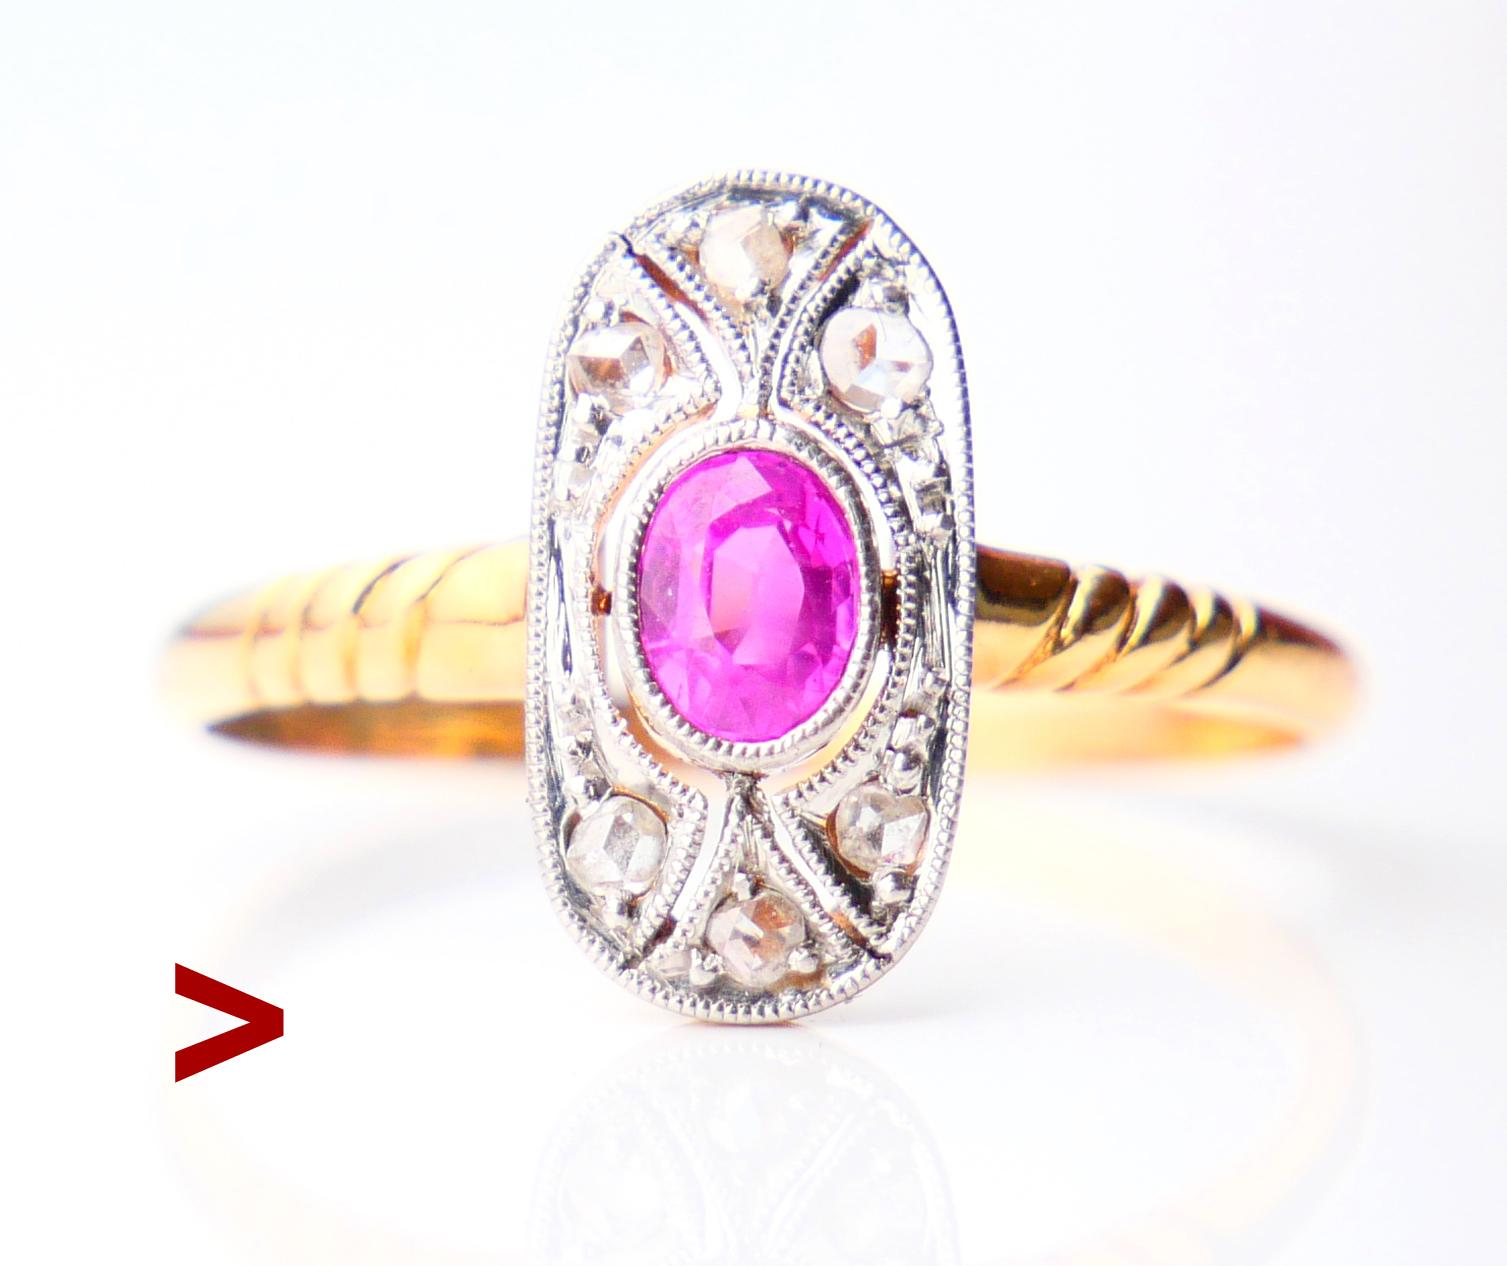 Fine cluster Ruby Ring made between ca.1900 -1930s. Combination of Gold, Platinum Ruby and Diamonds.

Platinum on Gold openwork crown 12 mm x 6 mm at axes x 3 mm deep with natural oval cut Ruby 4.5 mm x 3.5 mm / ca.021ct. and six rose cut Diamond